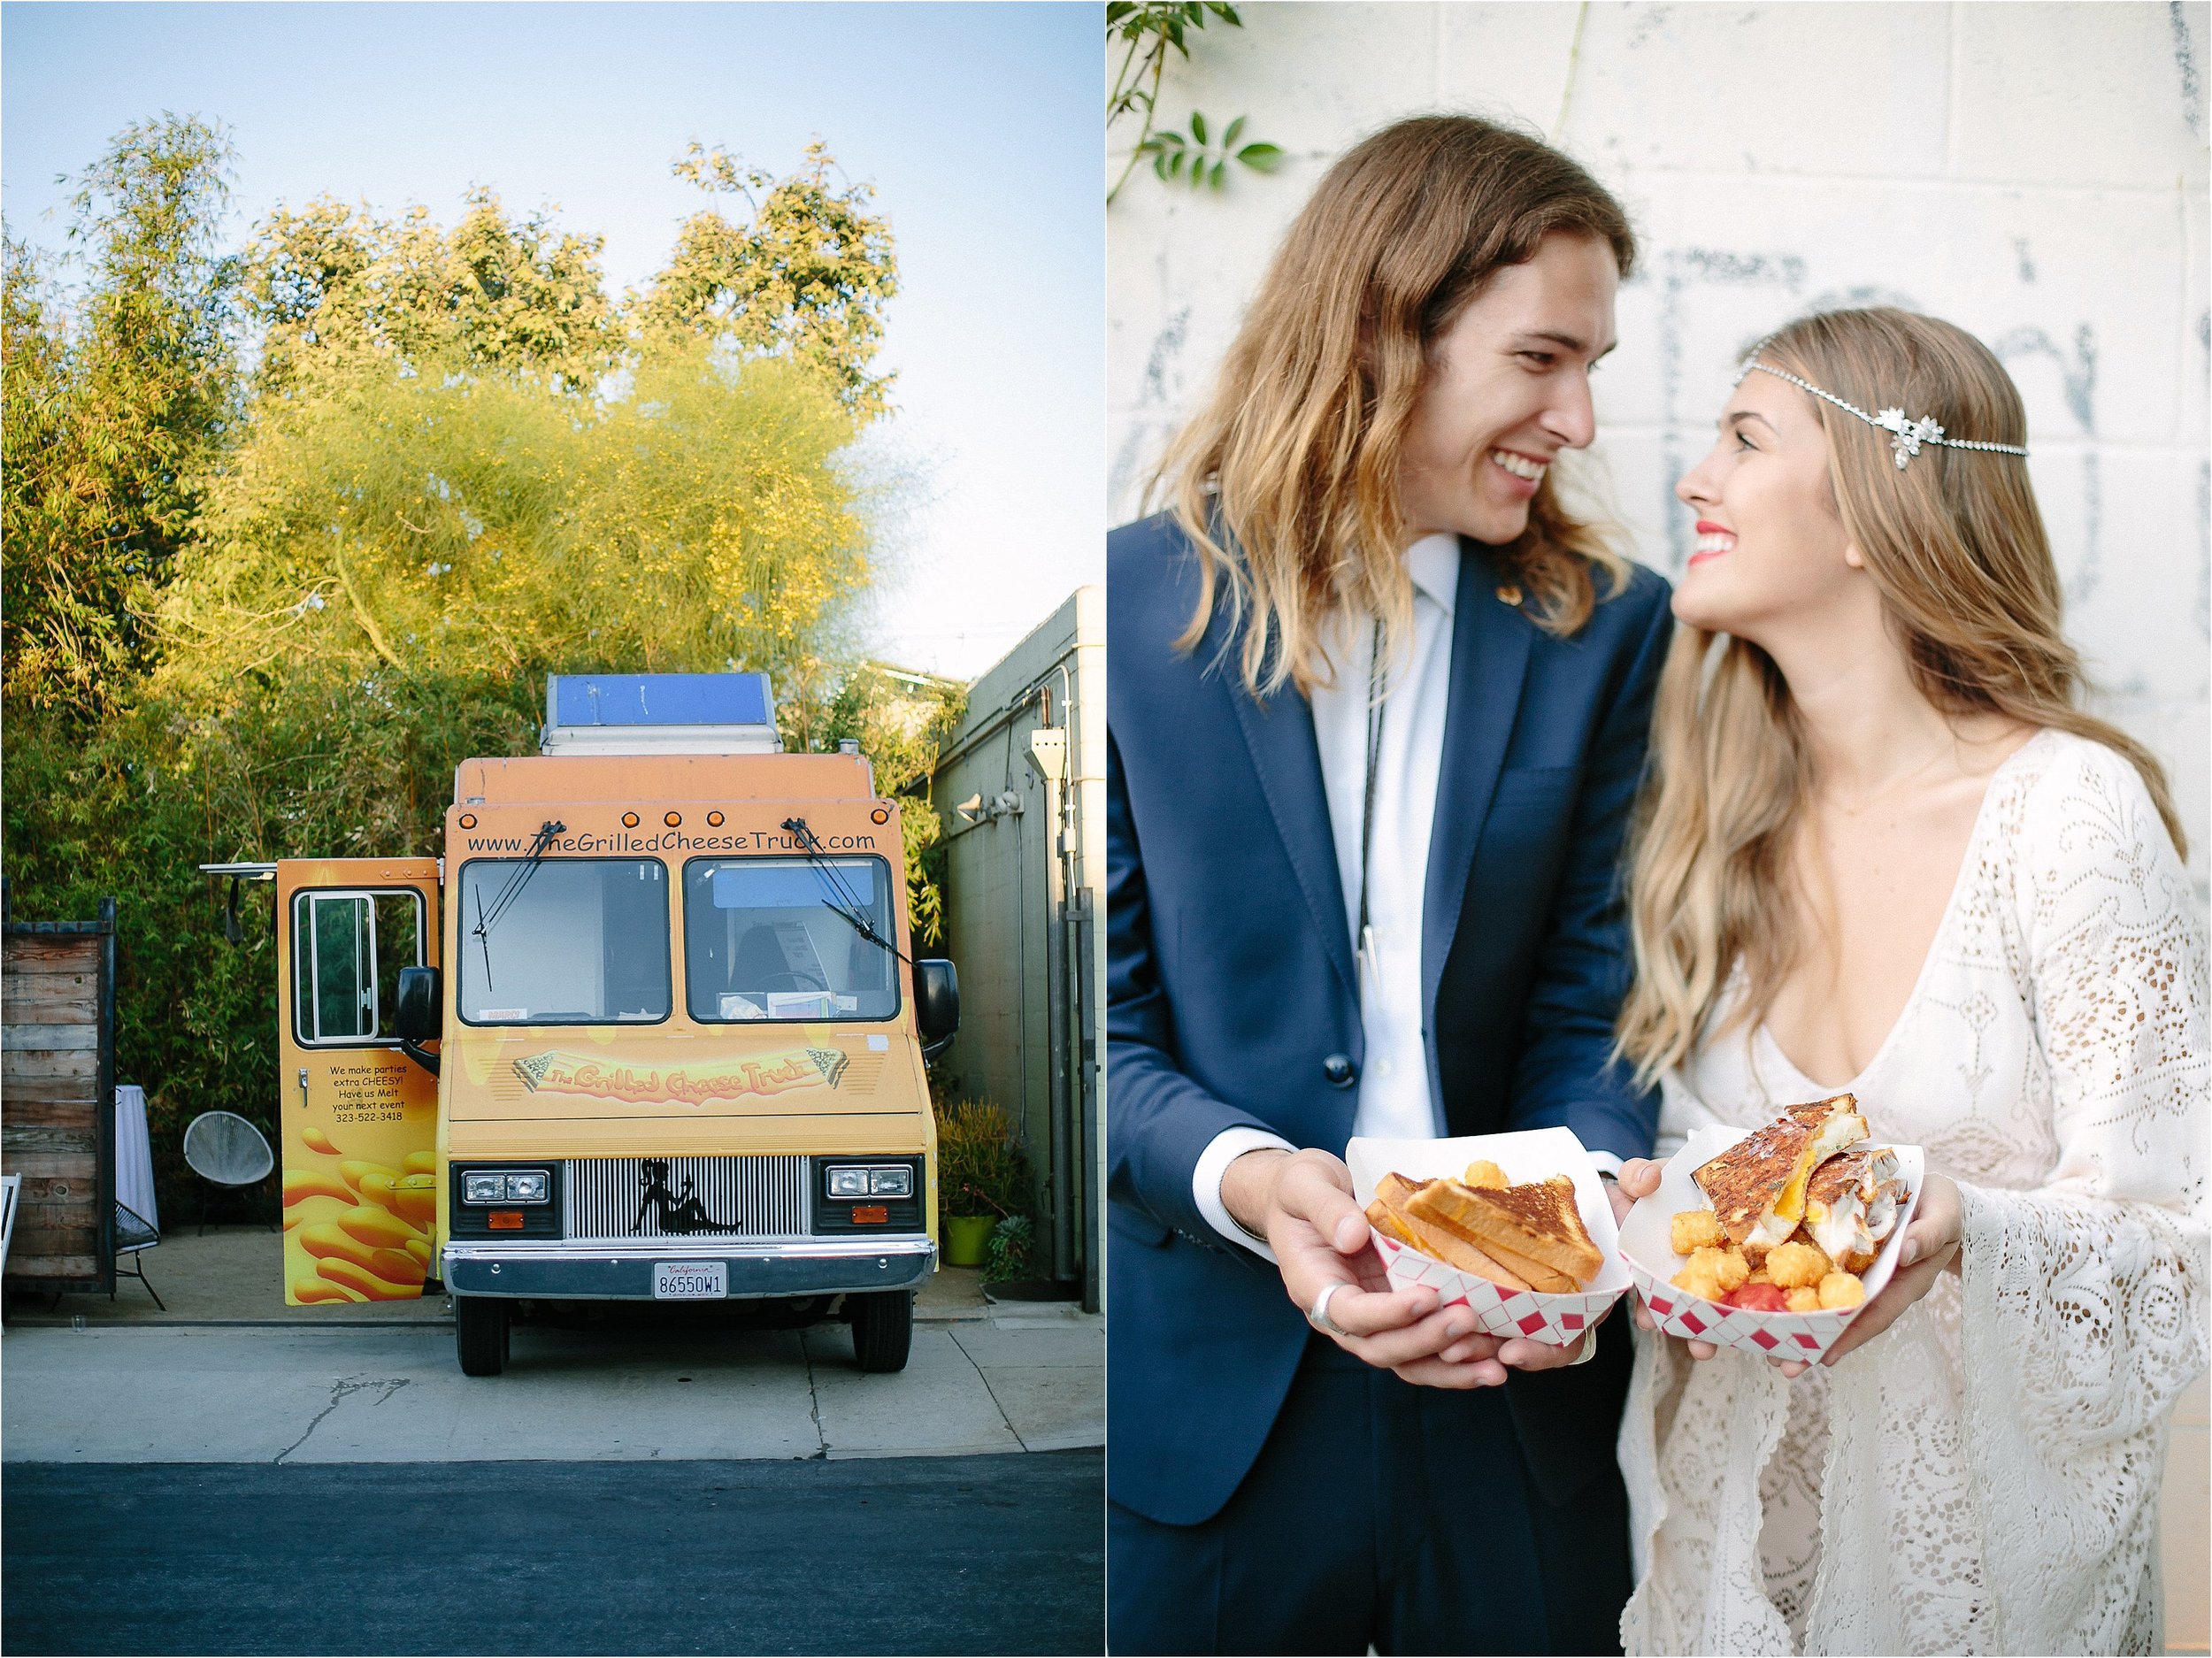 Grilled Cheese Food Truck Photo